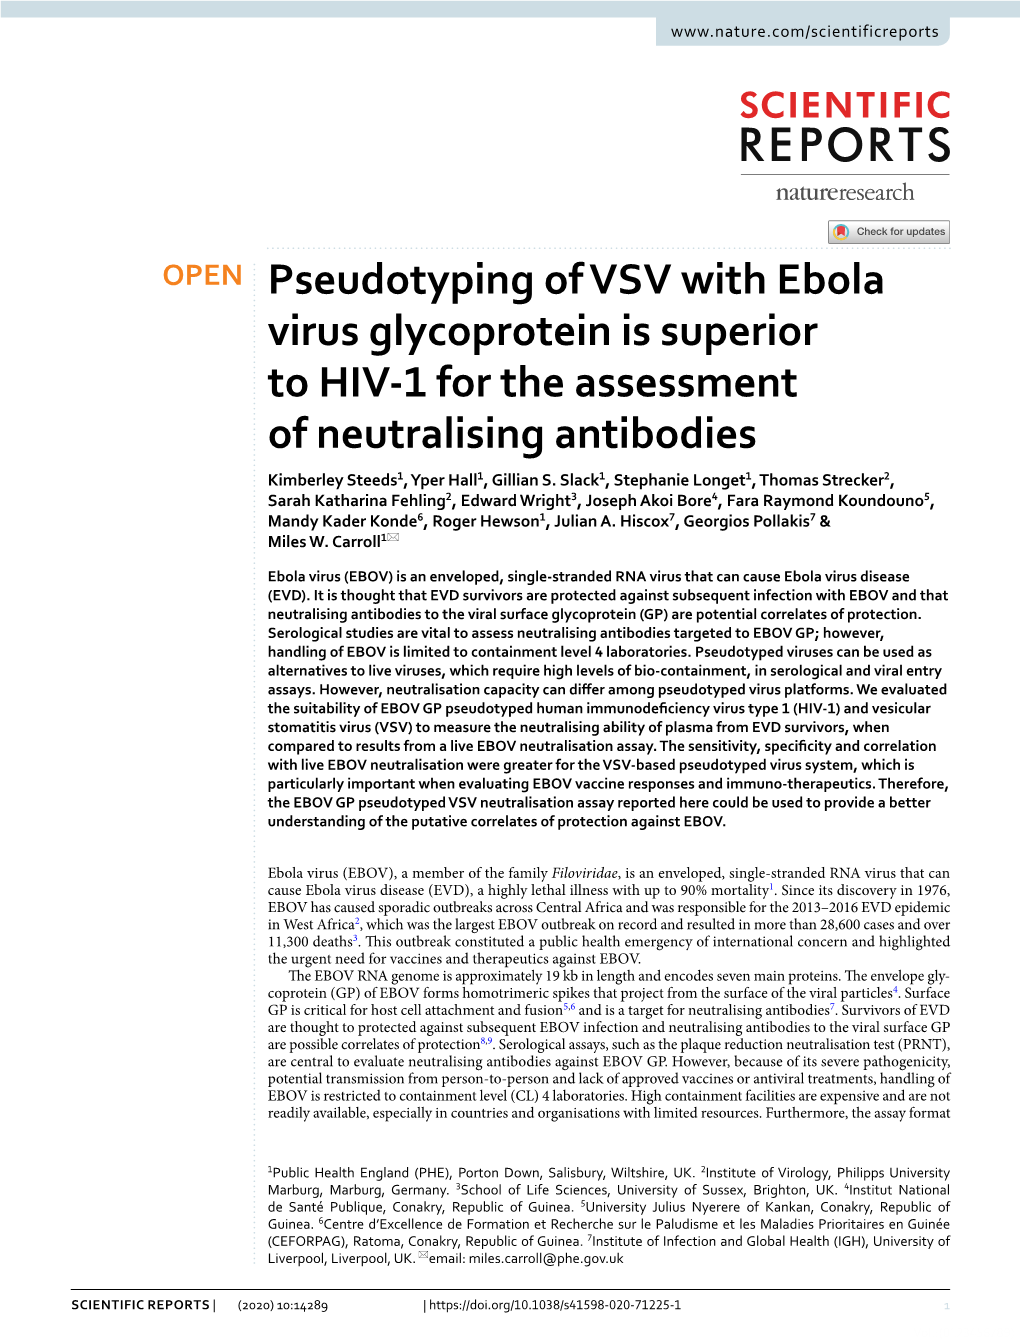 Pseudotyping of VSV with Ebola Virus Glycoprotein Is Superior to HIV-1 For